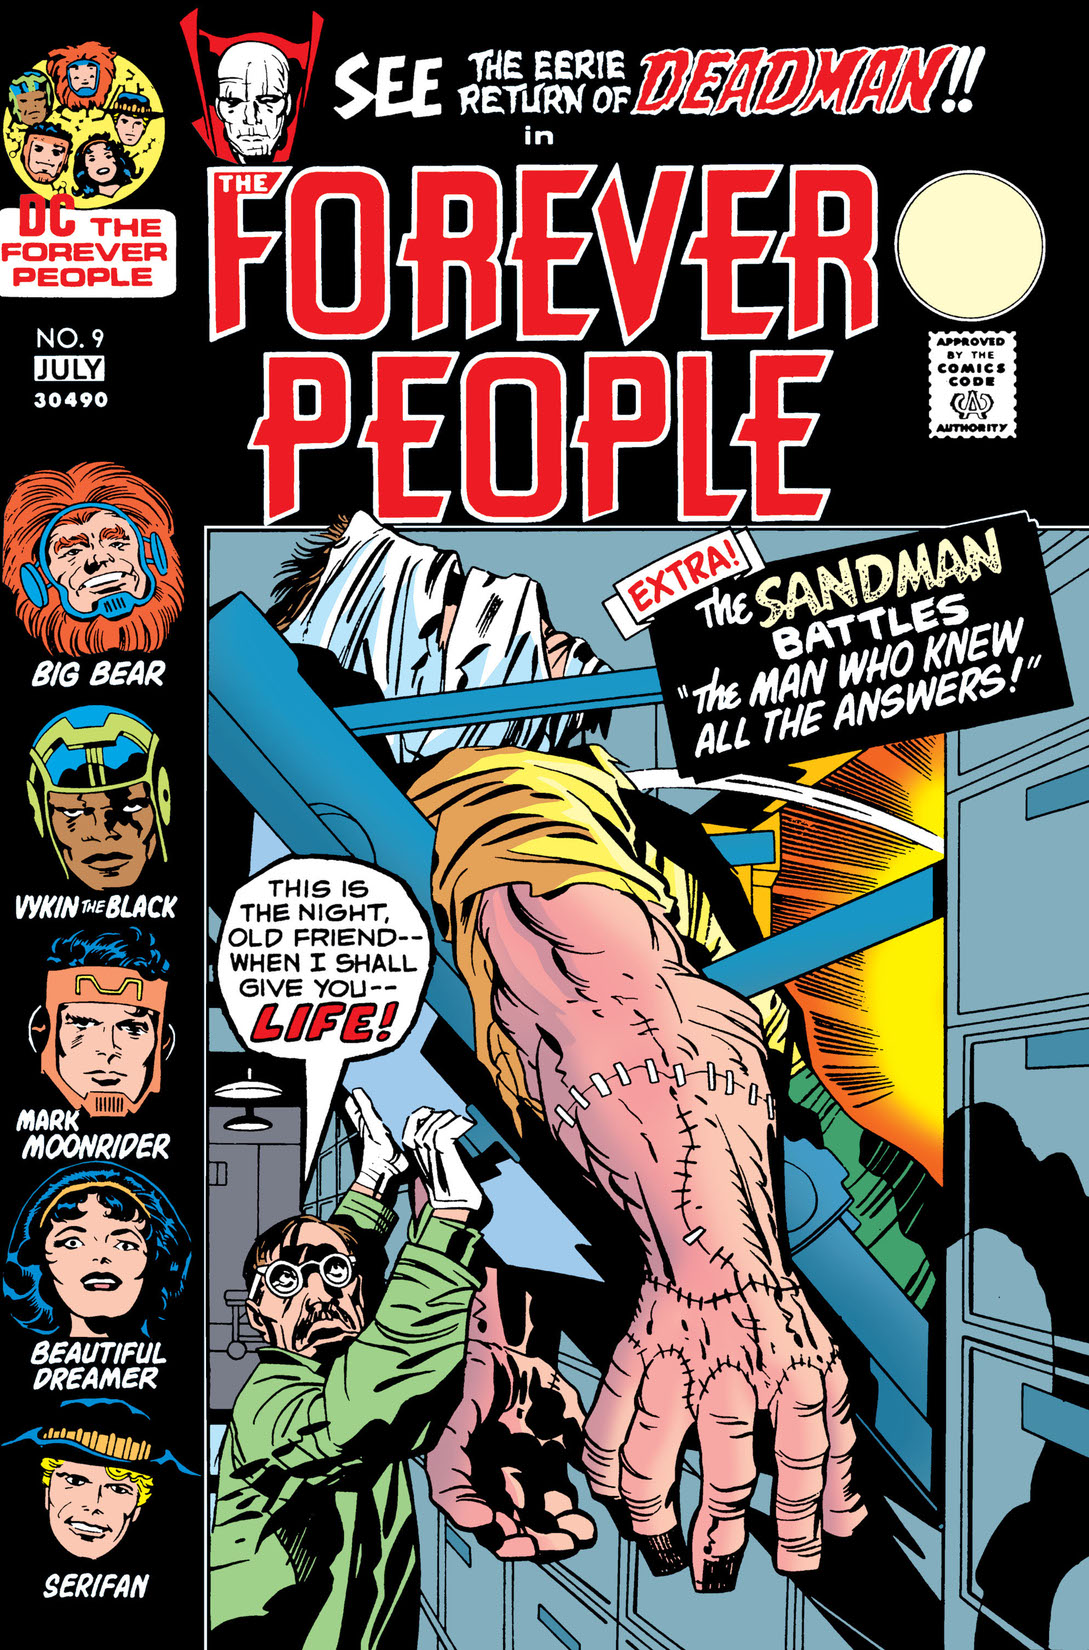 The Forever People #9 preview images